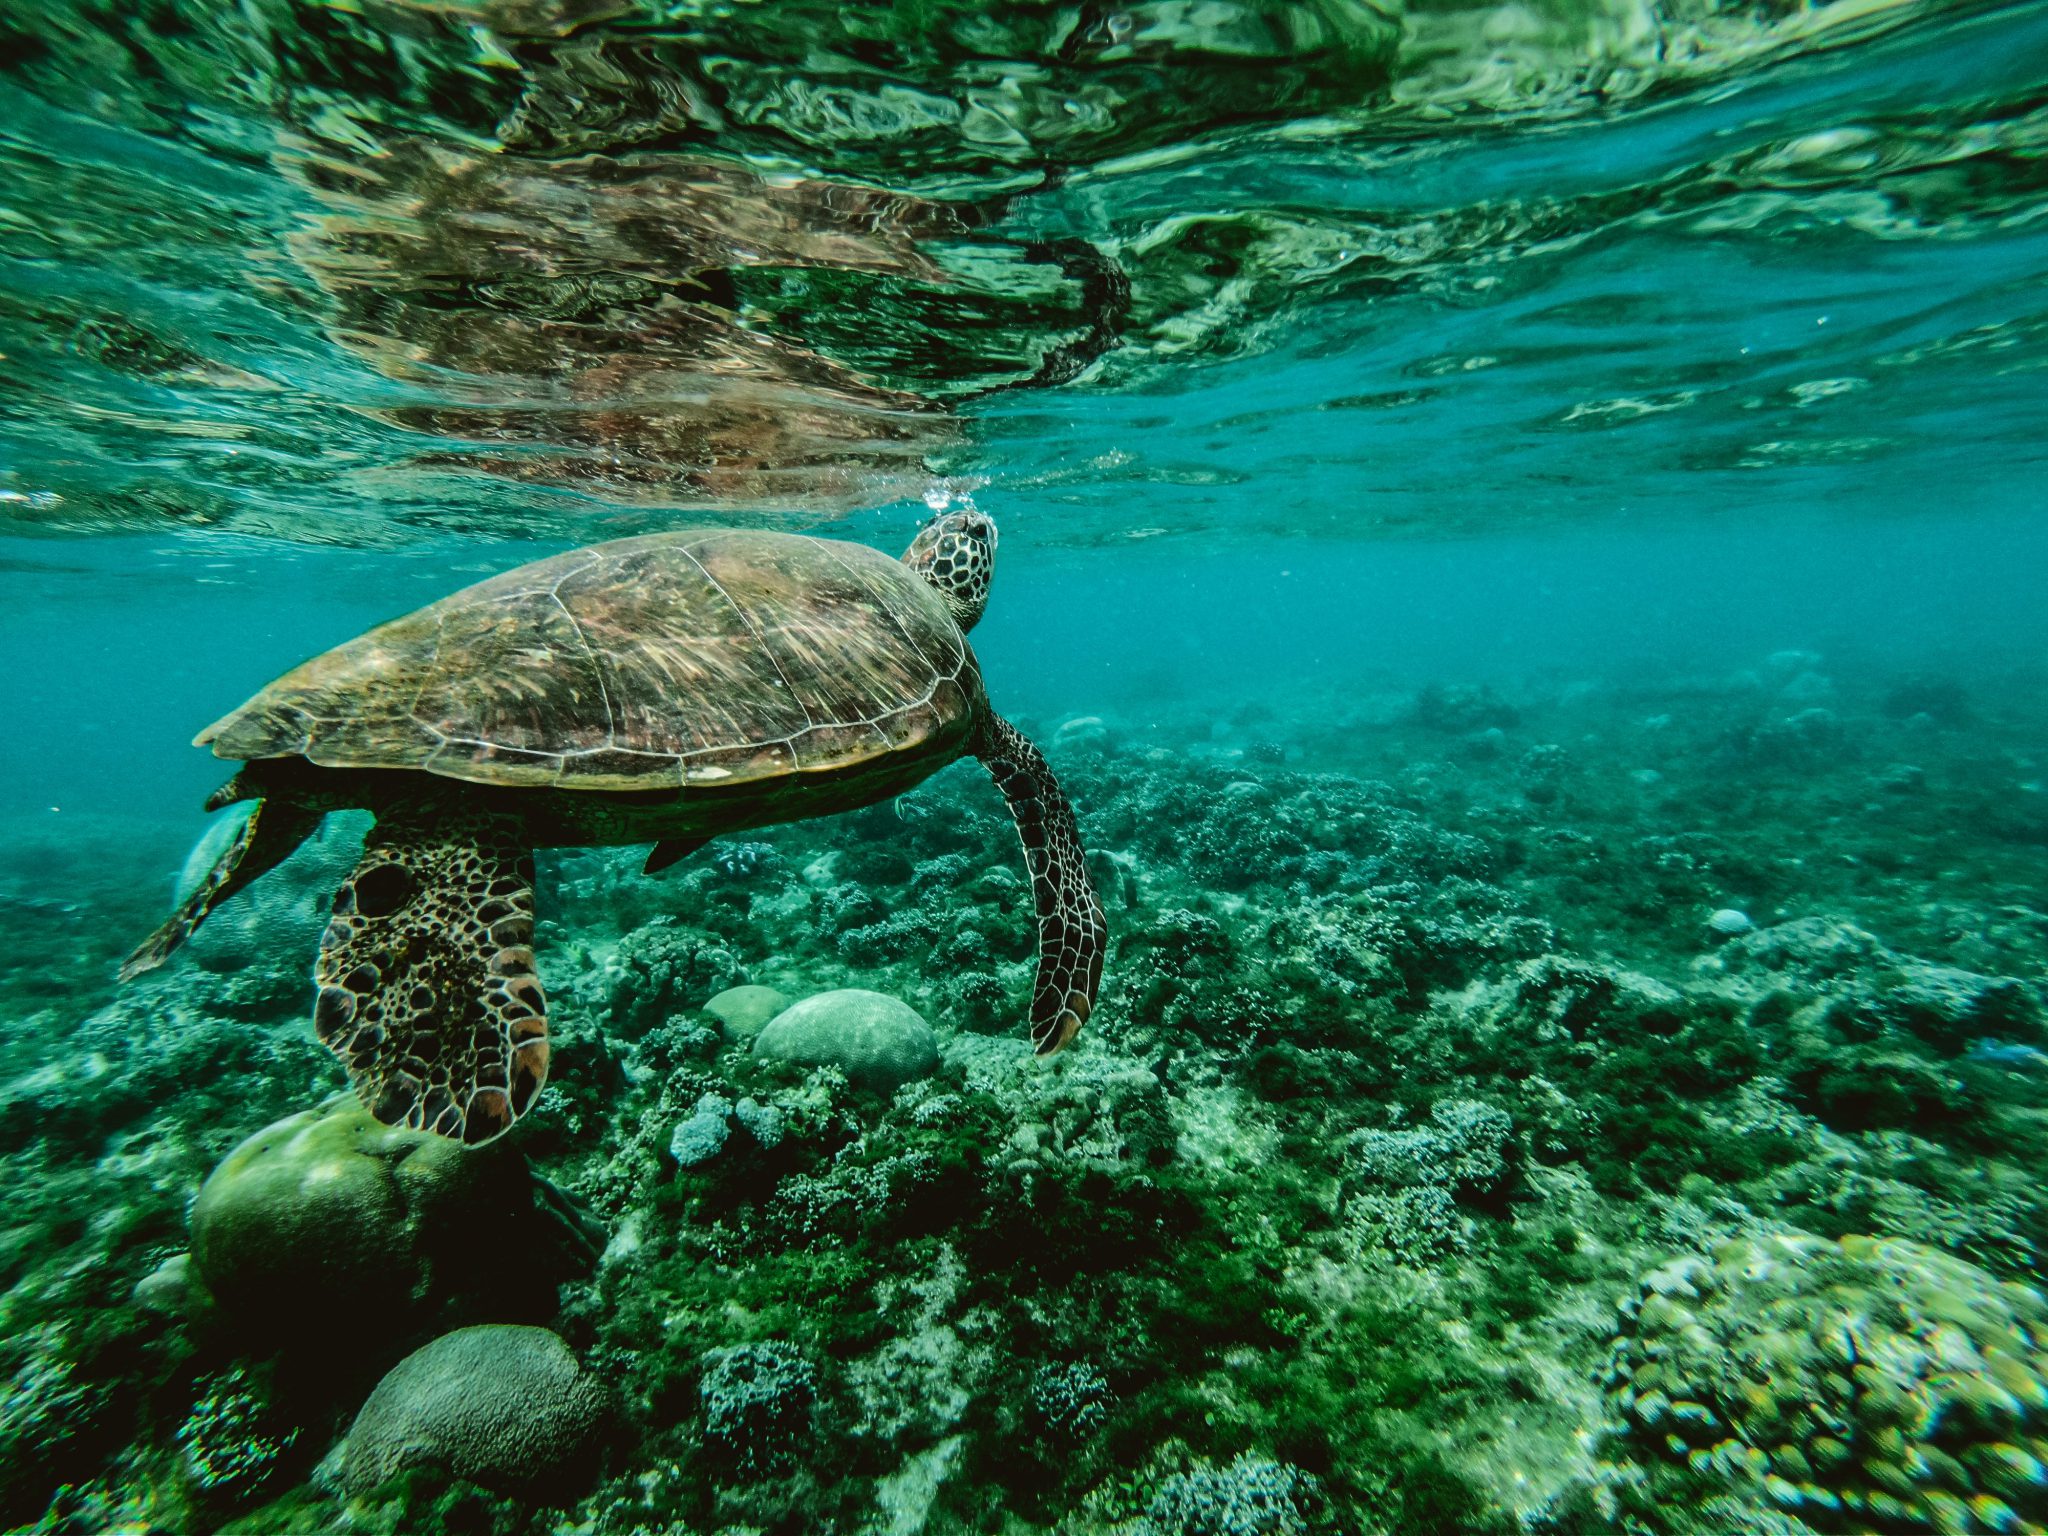 Photo by Belle Co: https://www.pexels.com/photo/photo-of-a-turtle-swimming-underwater-847393/